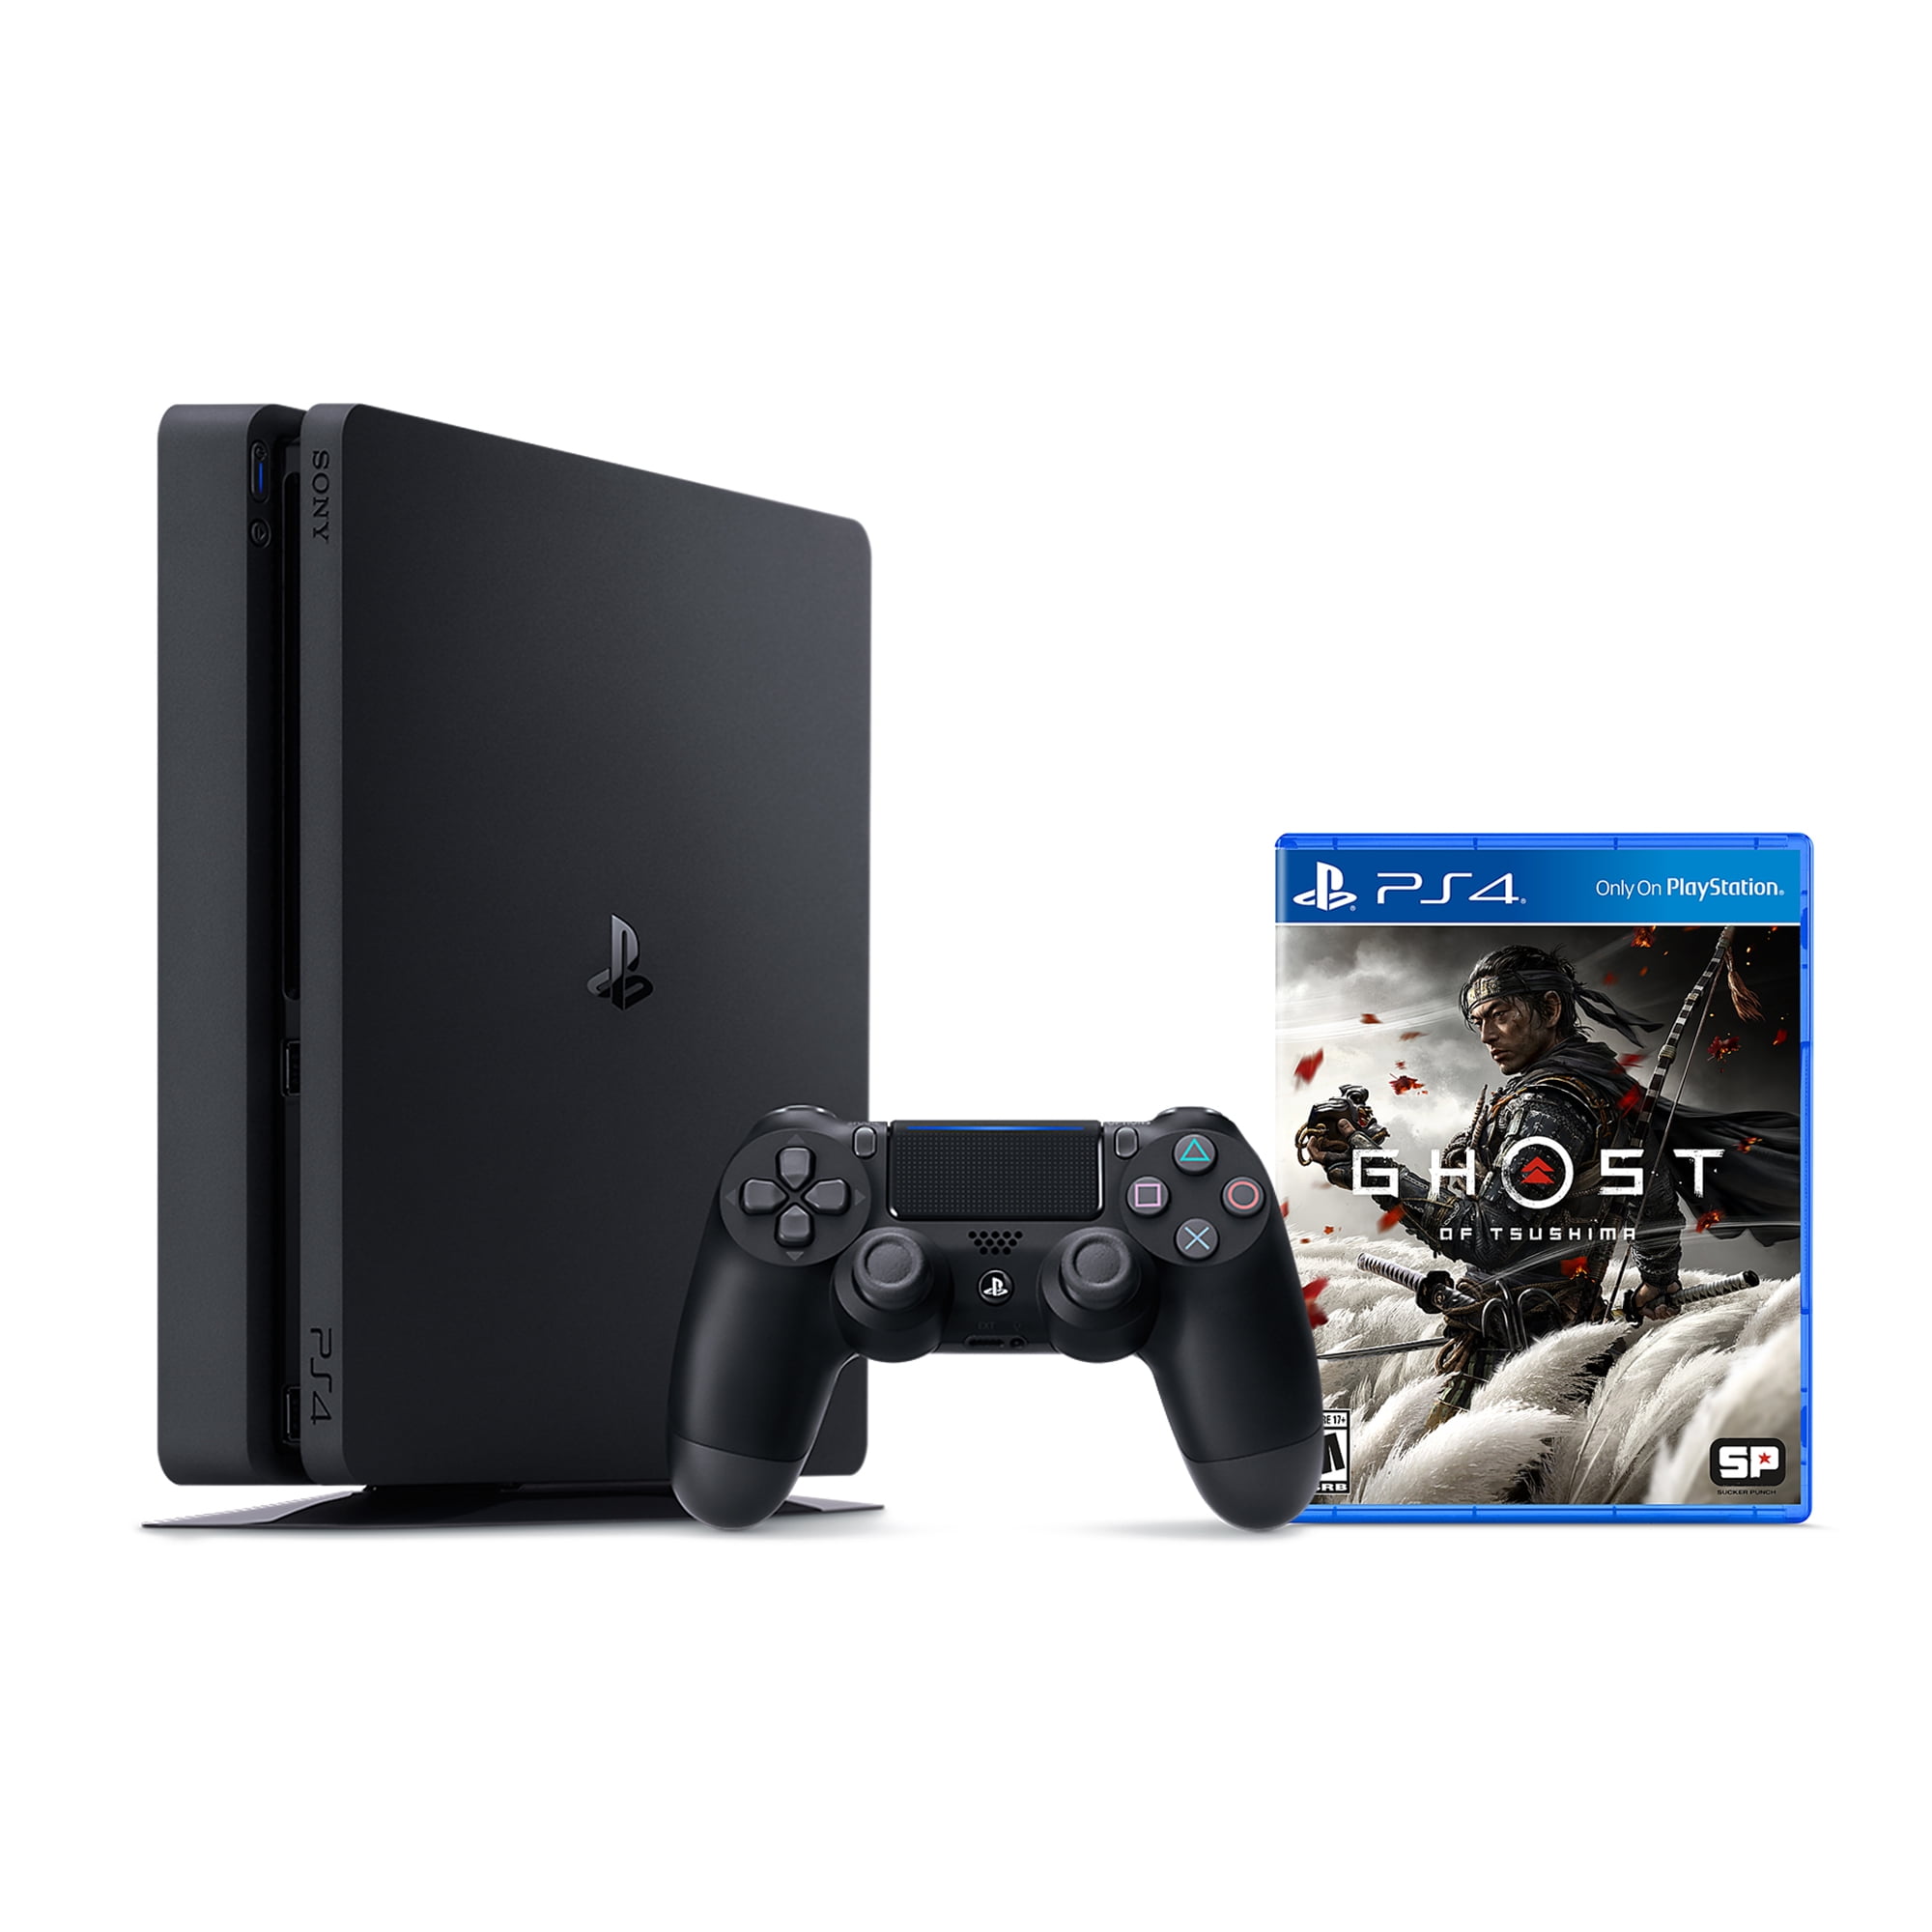 Bare gør Ubestemt mikro PlayStation 4 1TB Console with Ghost of Tsushima - PS4 Slim 1TB Jet Black  HDR Gaming Console, Wireless Controller and Game - Walmart.com